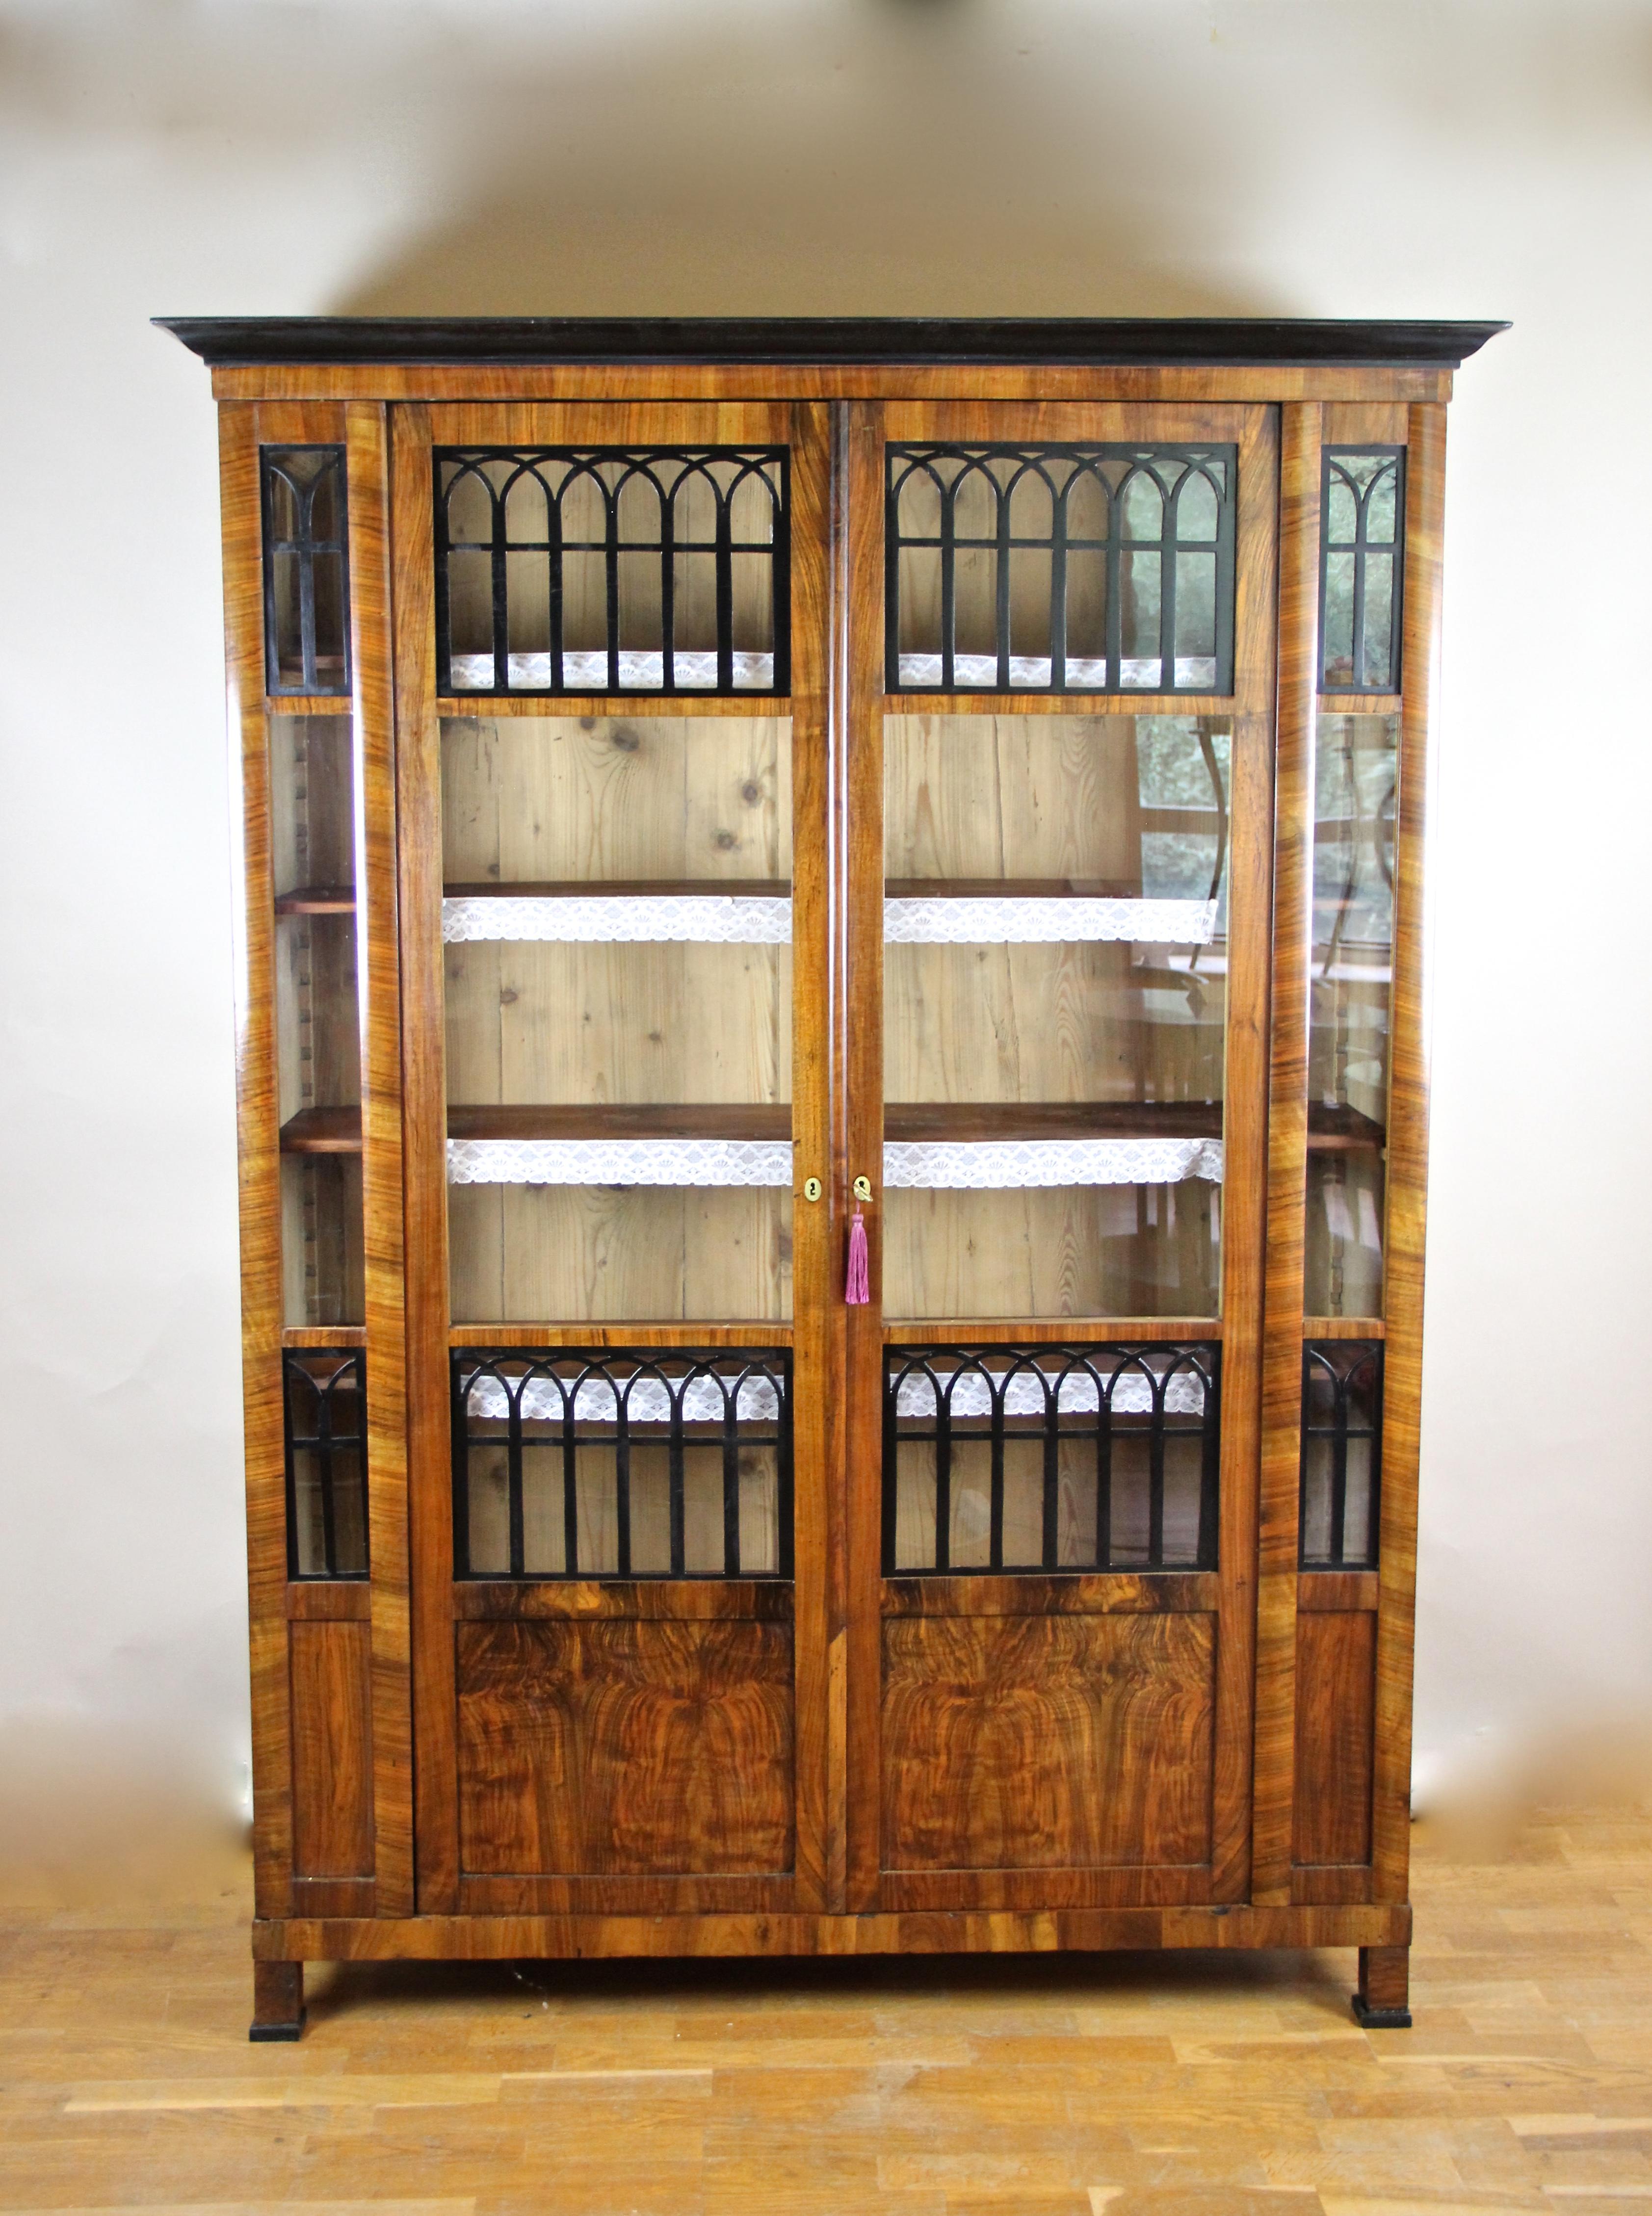 Outstanding Biedermeier cabinet/ bookcase from the renowed Biedermeier era  in Austria around  1830. Veneered in beautiful burr walnut and fine nut wood this slender antique cabinet features two doors with large glass panels which are additionally